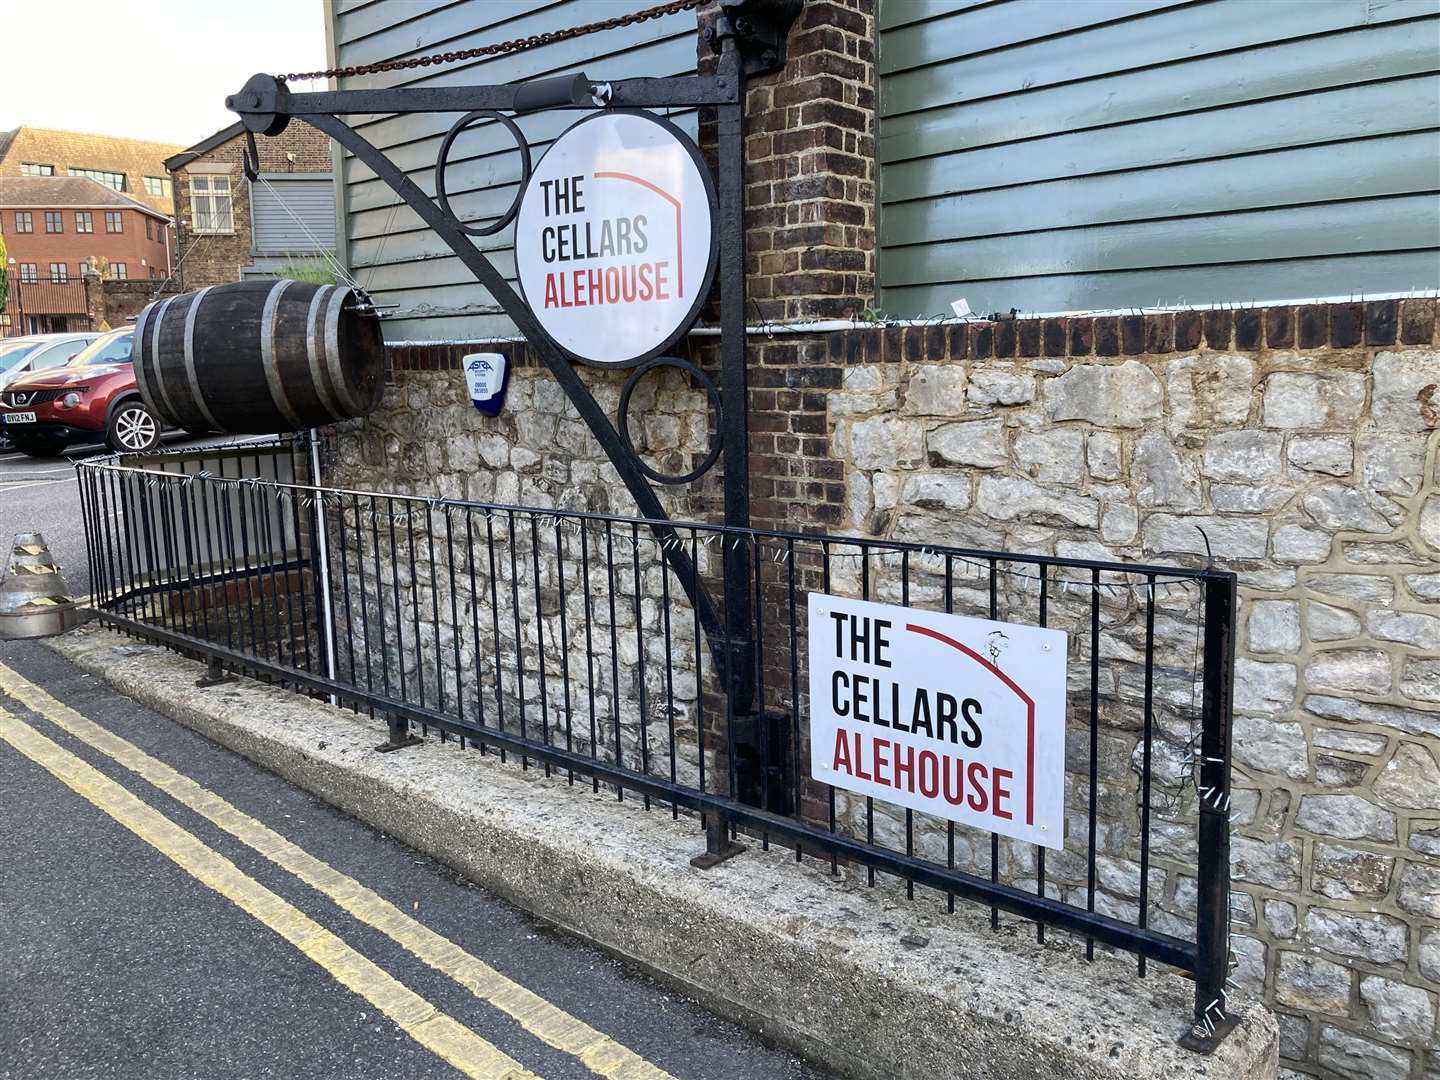 The Cellars Alehouse in Maidstone